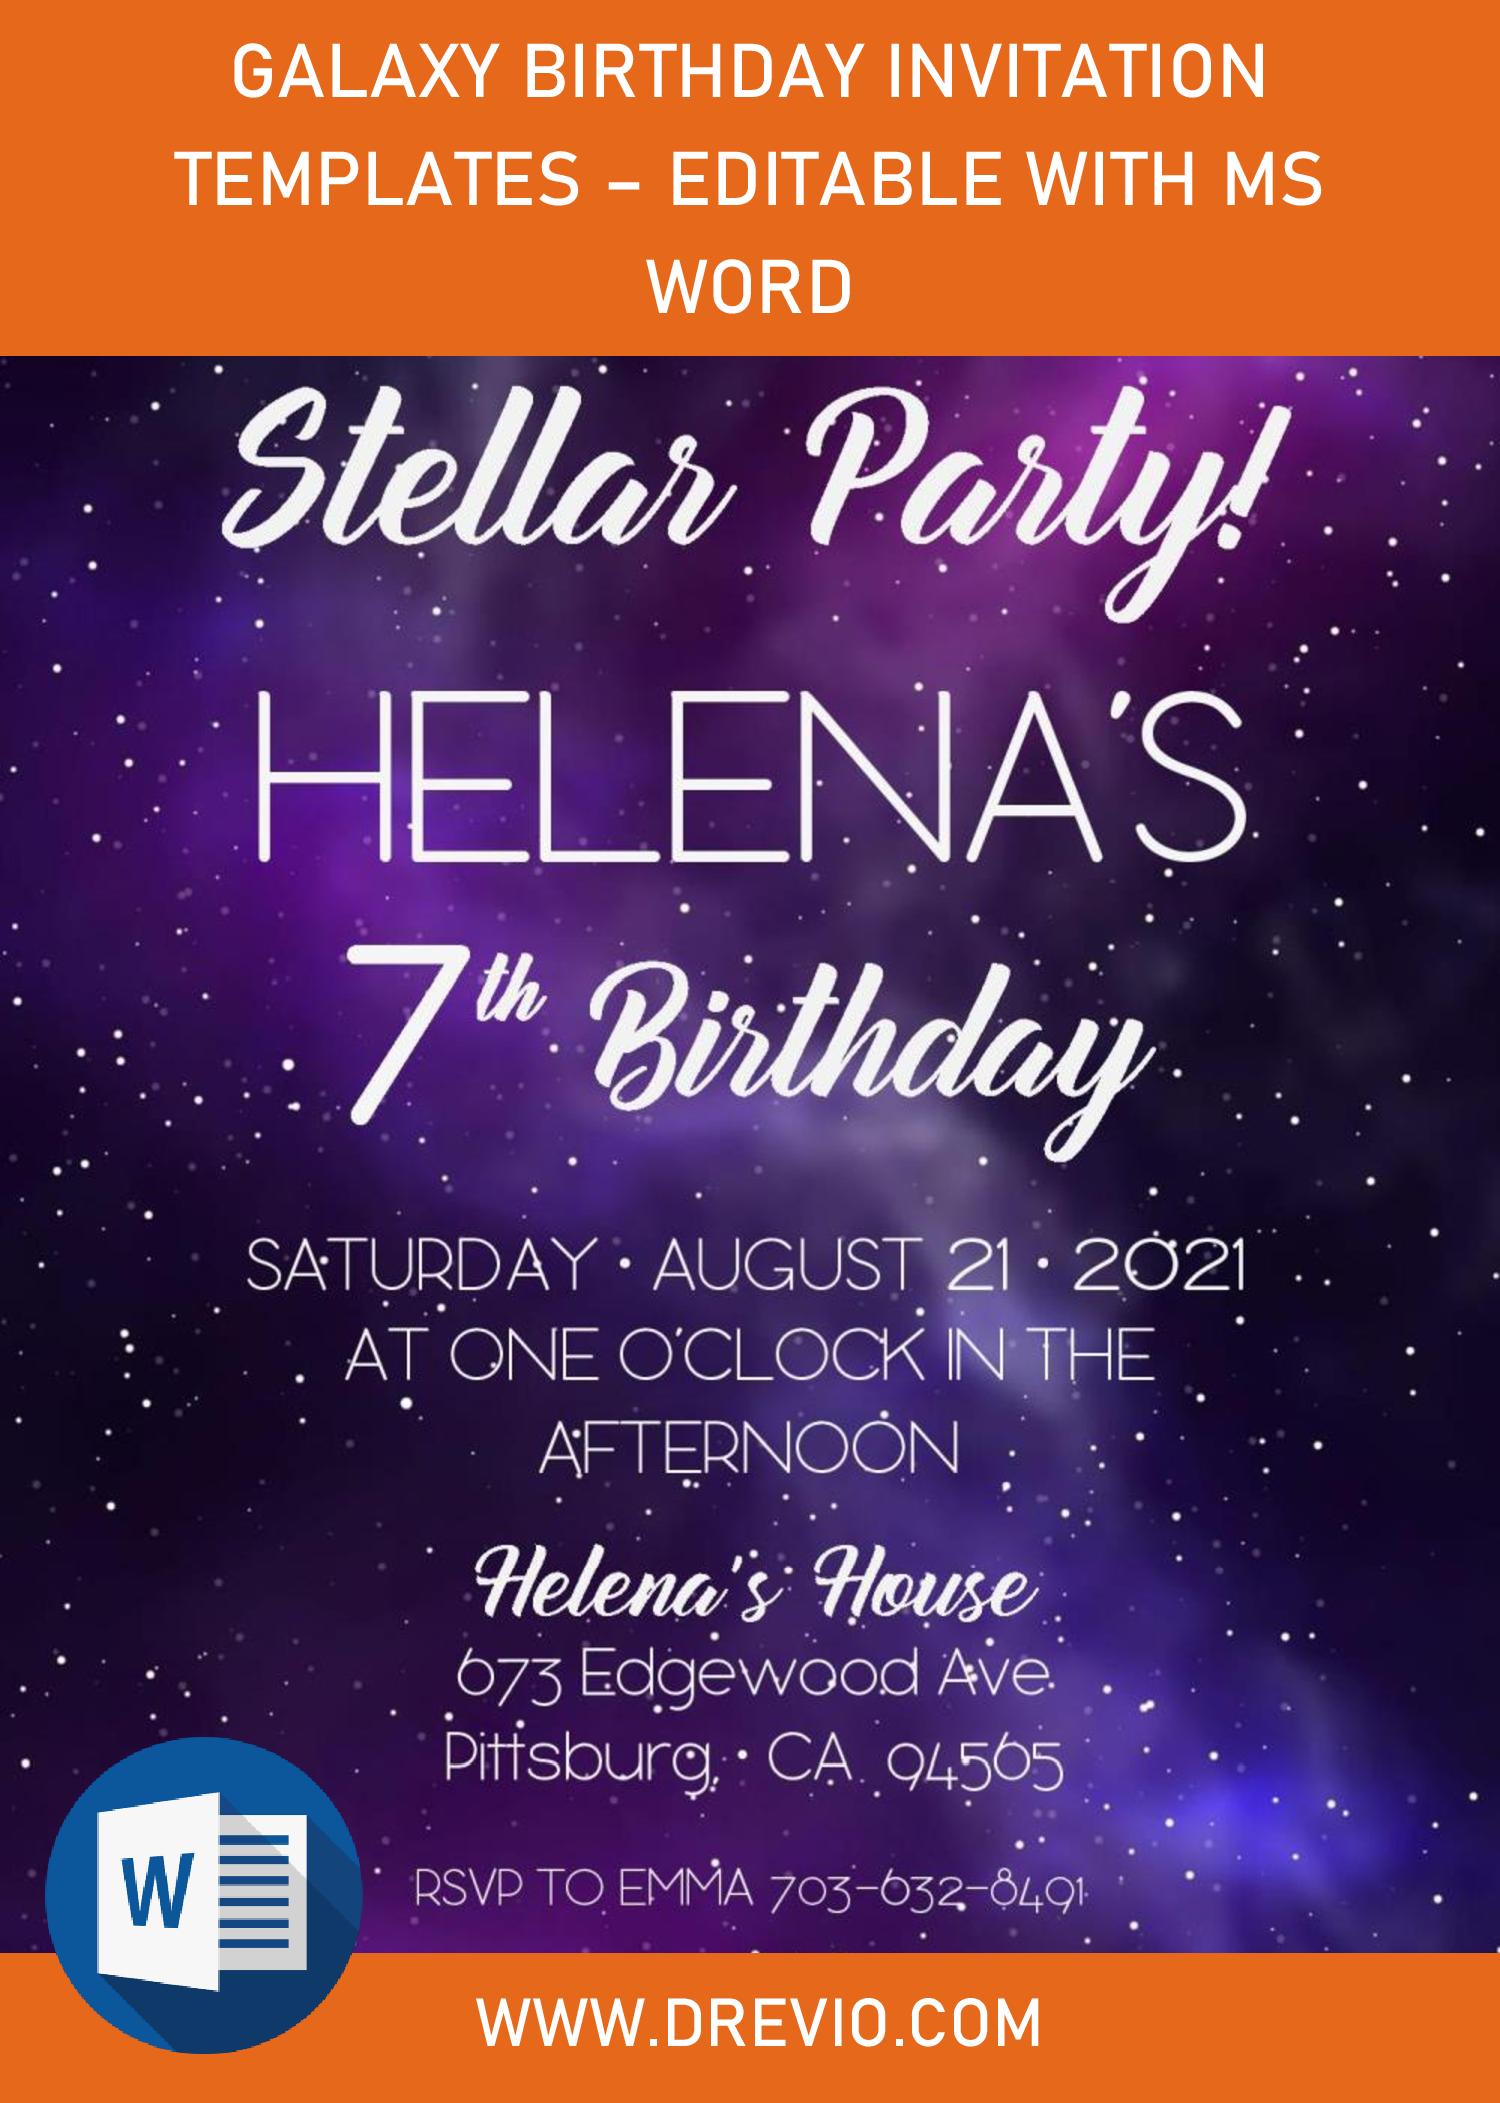 Galaxy Birthday Invitation Templates – Editable With MS Word Throughout Microsoft Word Birthday Card Template